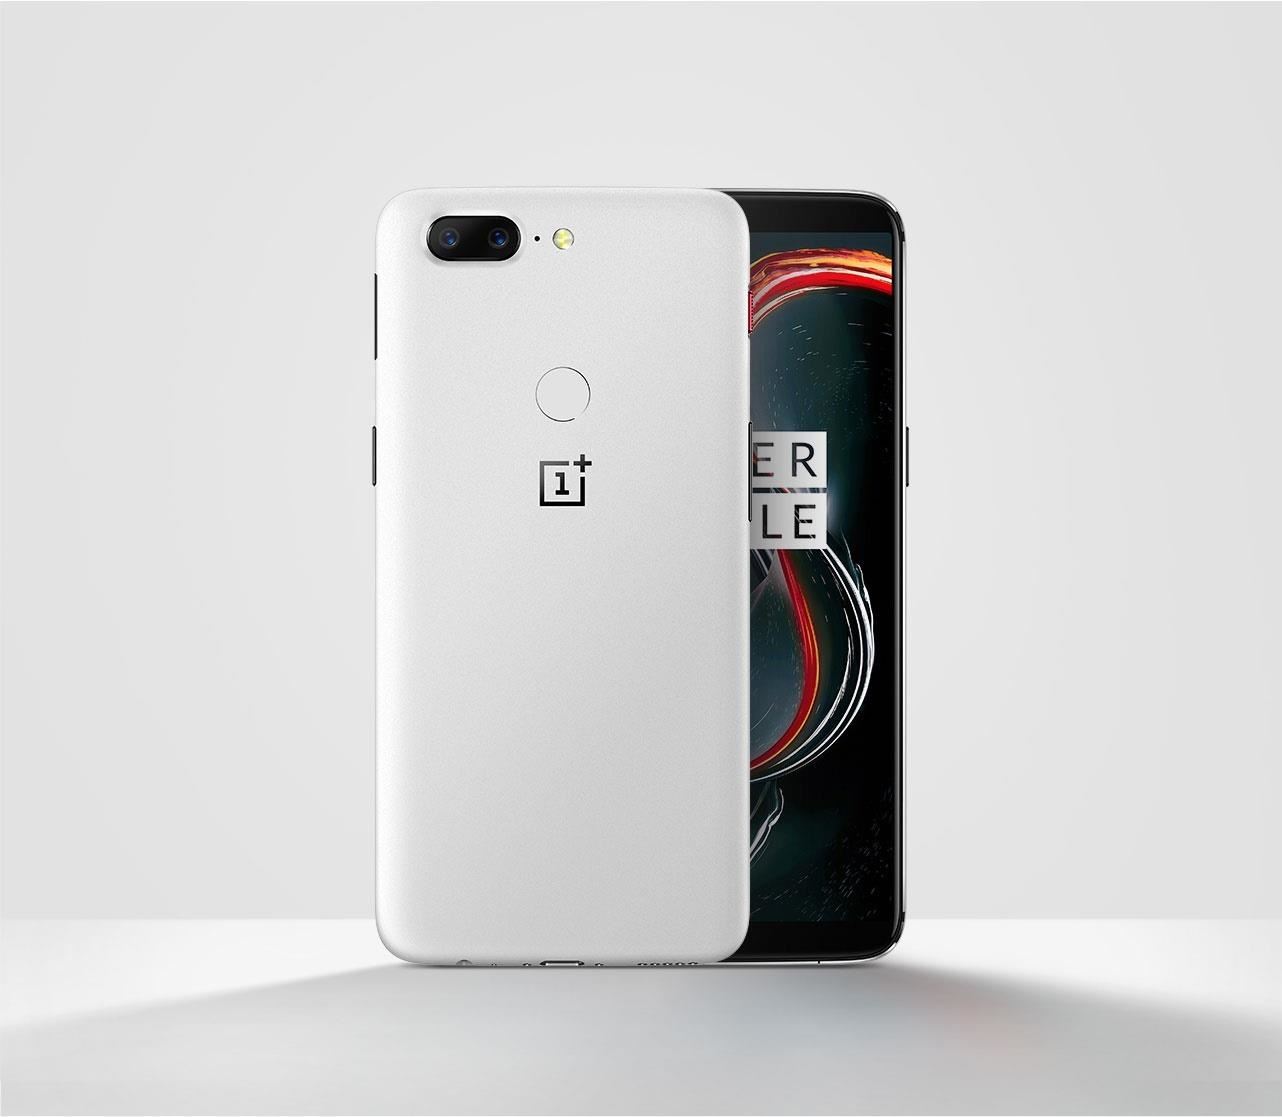 The OnePlus 5T's New Sandstone White Color Already Sold Out in the US